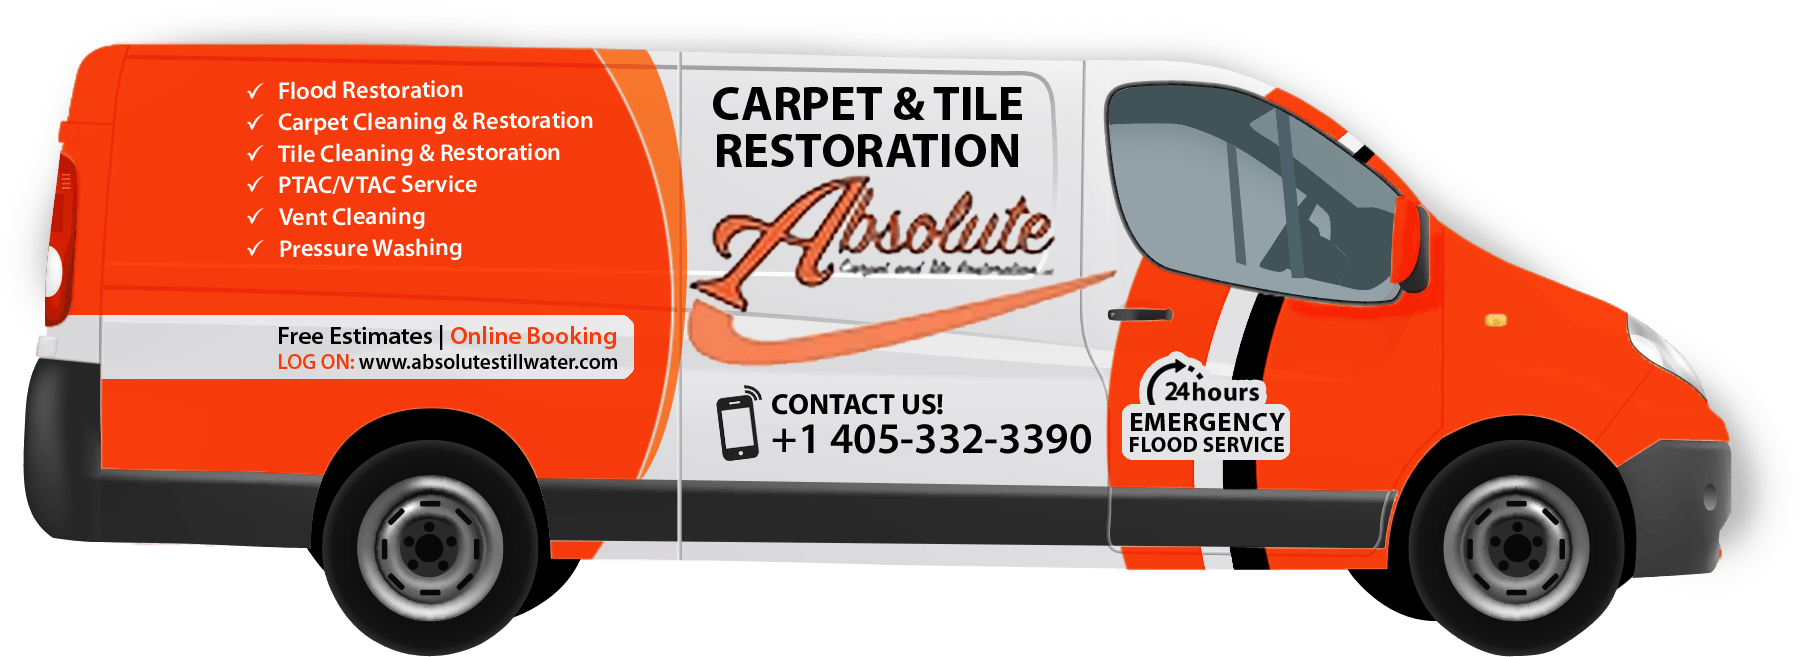 an orange and white van of Absolute Carpet and Tile Restoration